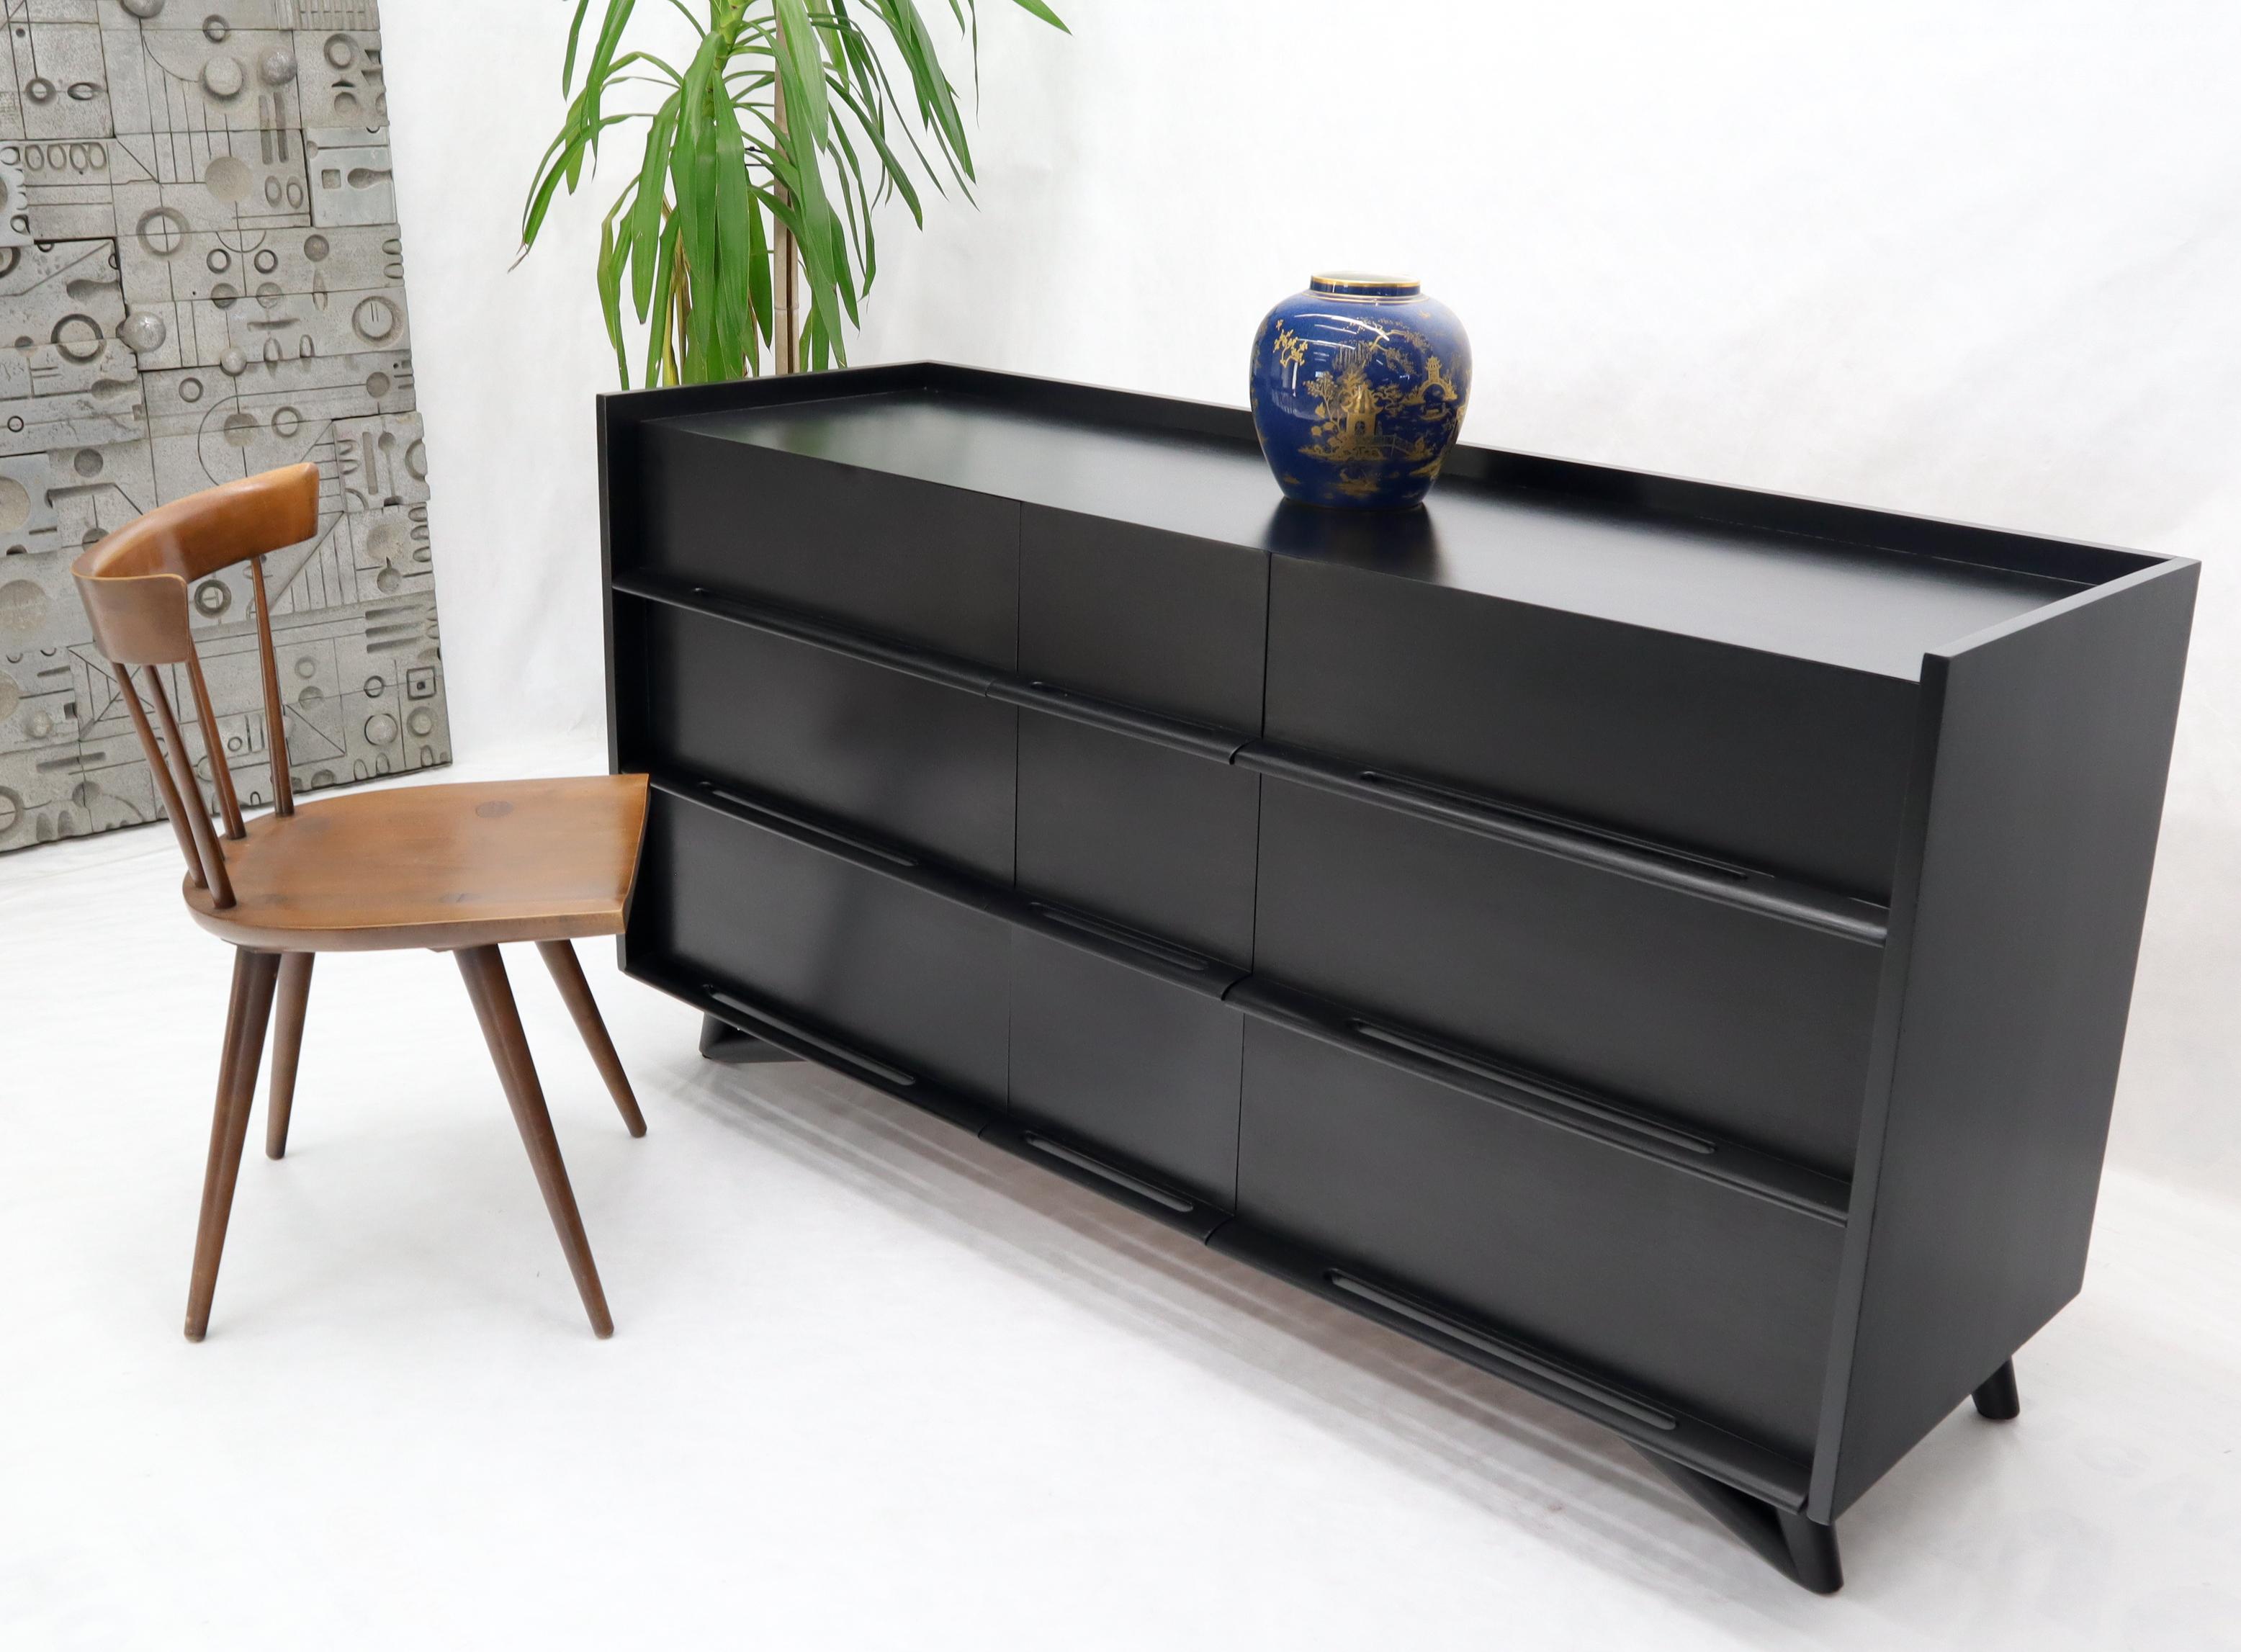 Nine 9 drawers black lacquer Mid-Century Modern long credenza dresser attributed to Edmond Spence.